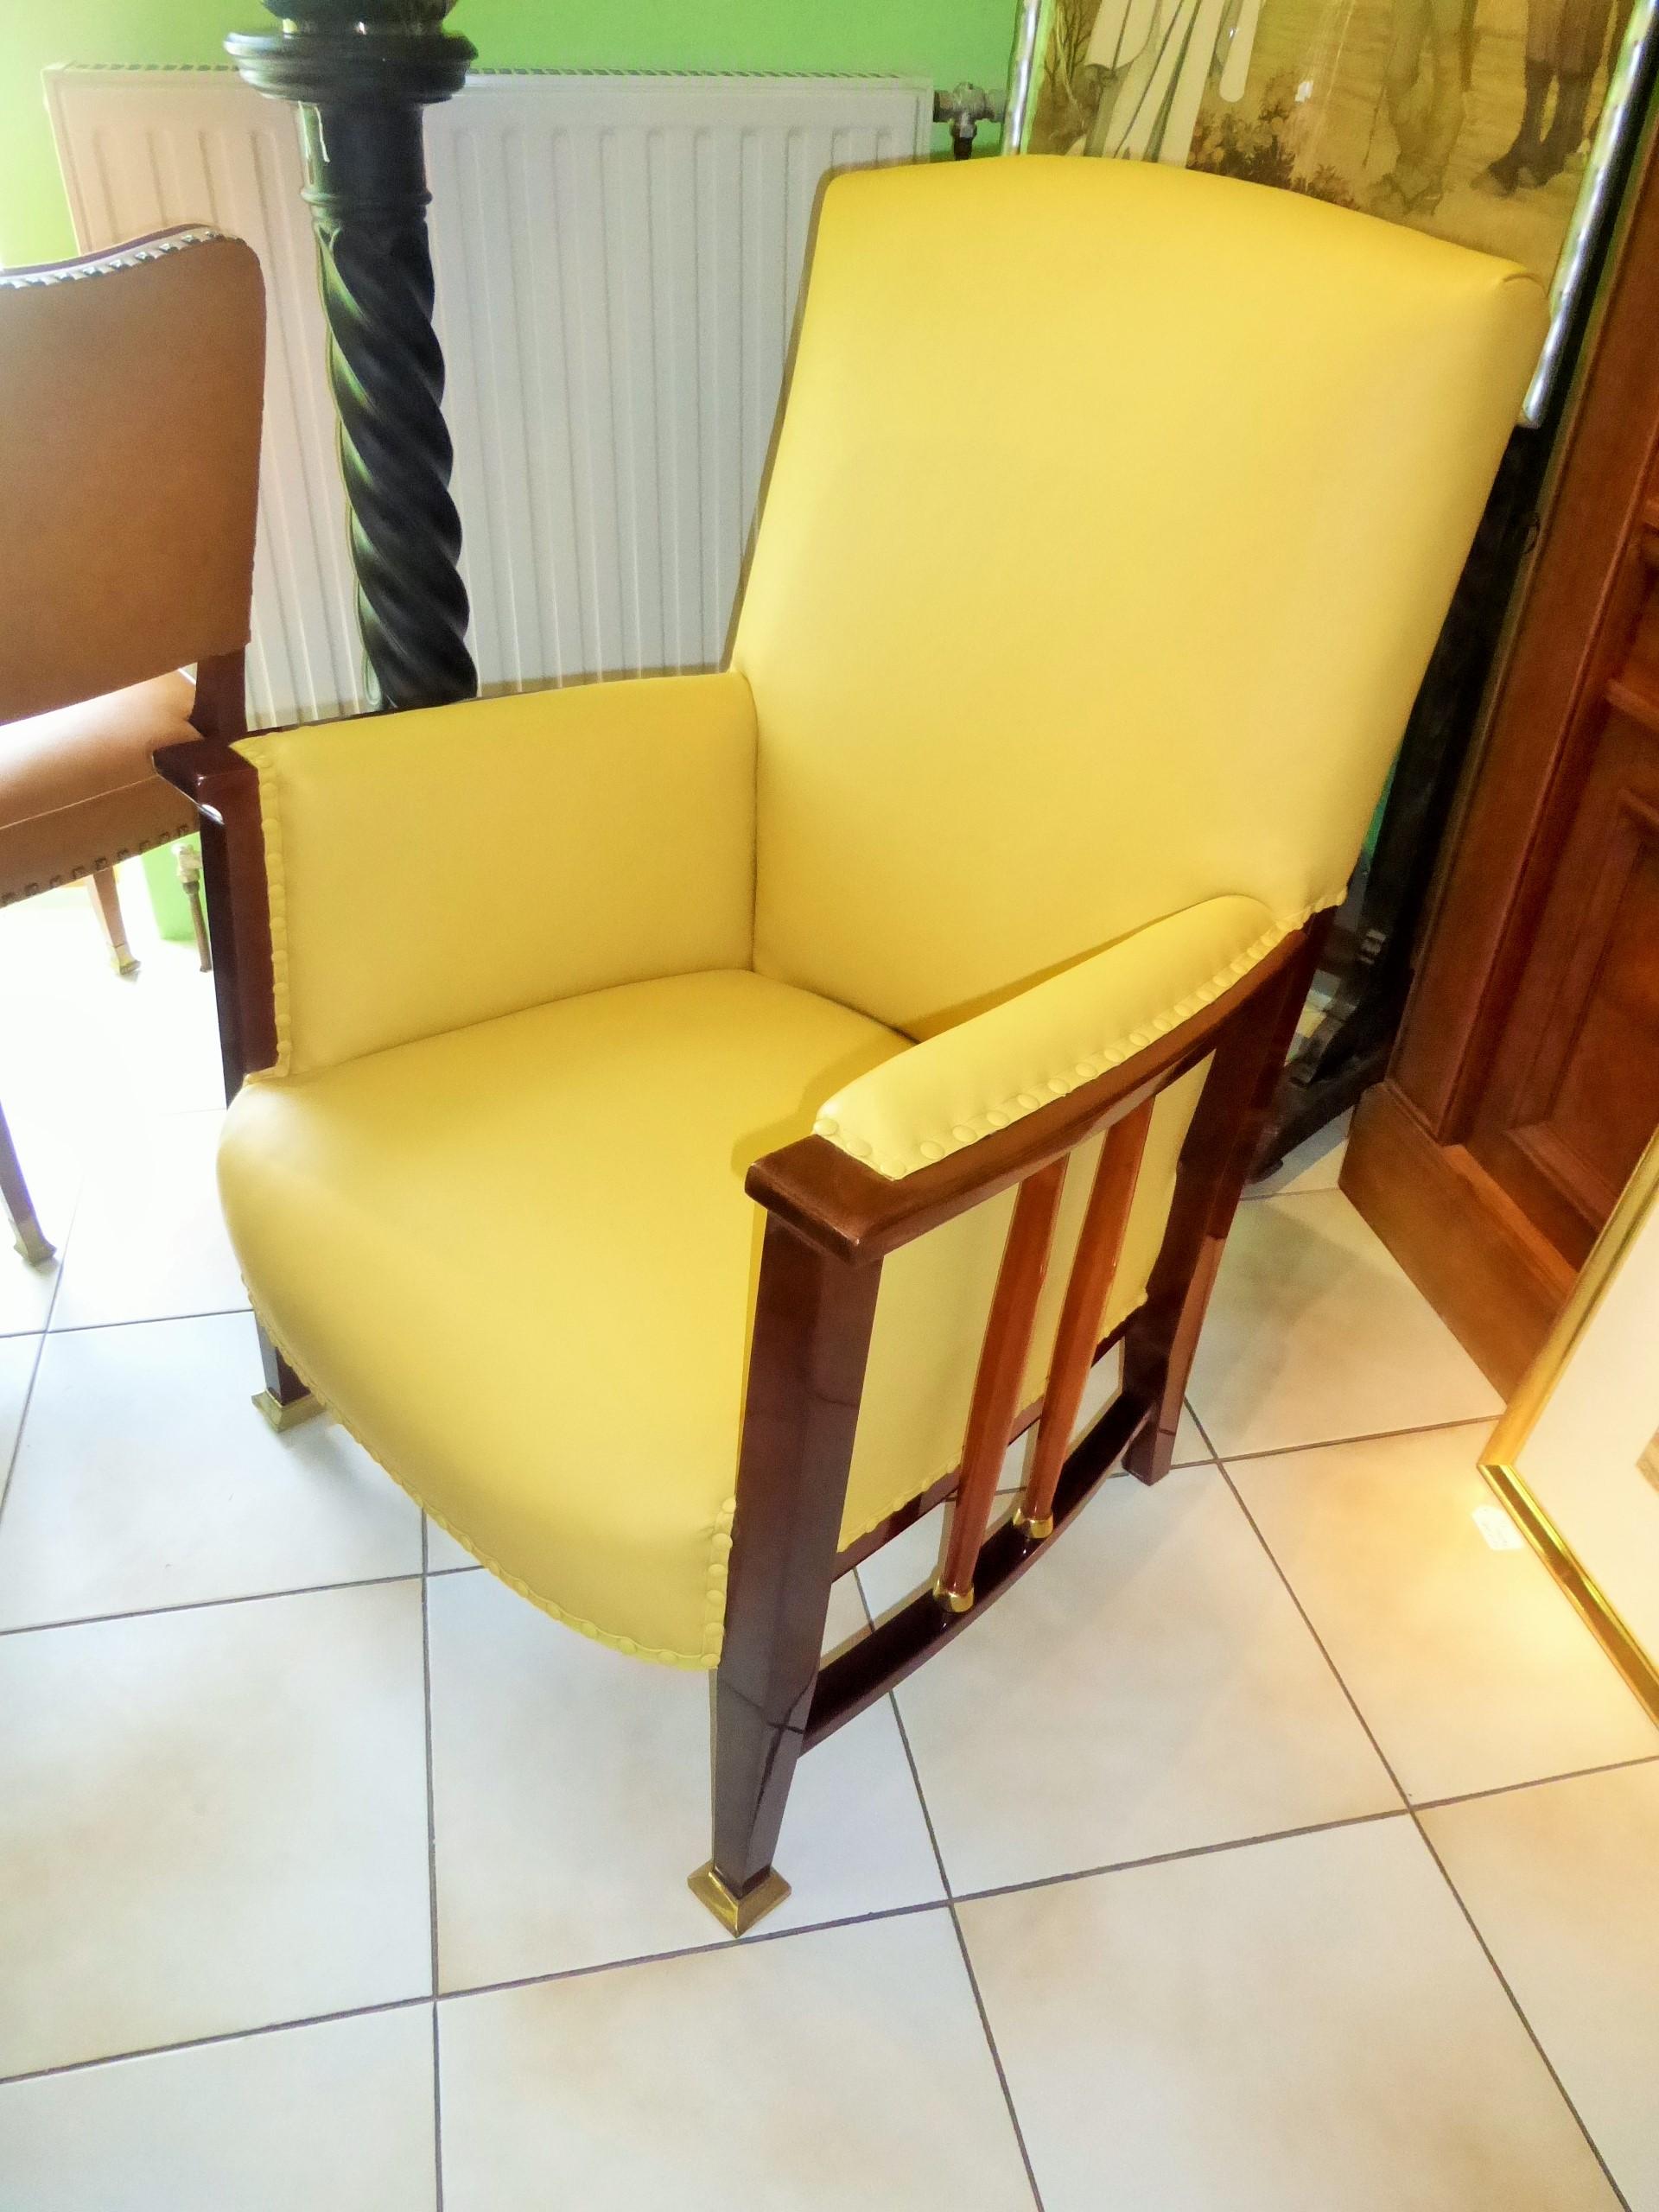 Austrian Art Nouveau Armchairs from 1910 Made of Mahogany with Yellow Leather For Sale